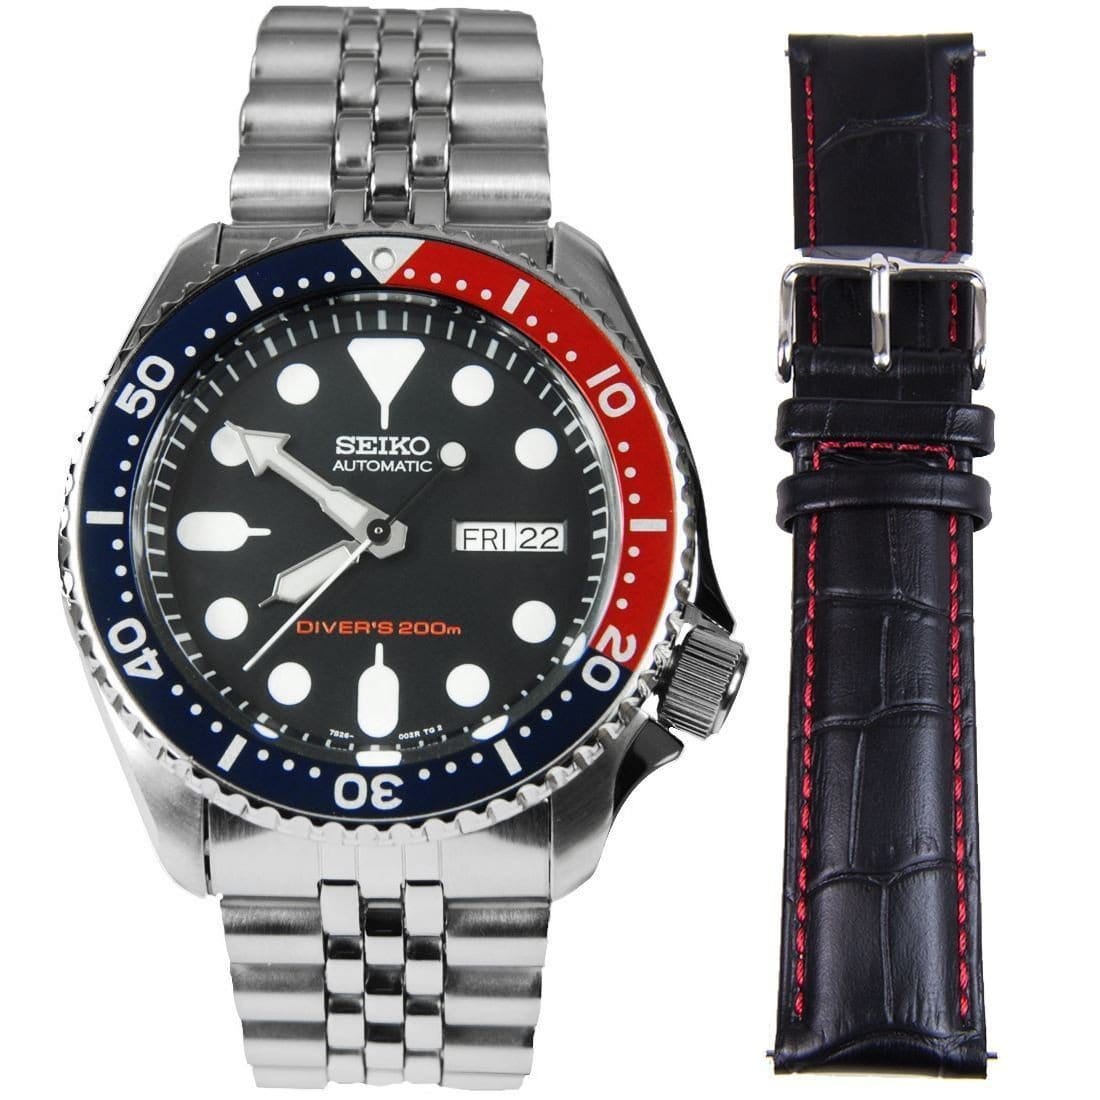 SKX009K2 Seiko Automatic Analog Mens Dive Watch with Extra Strap